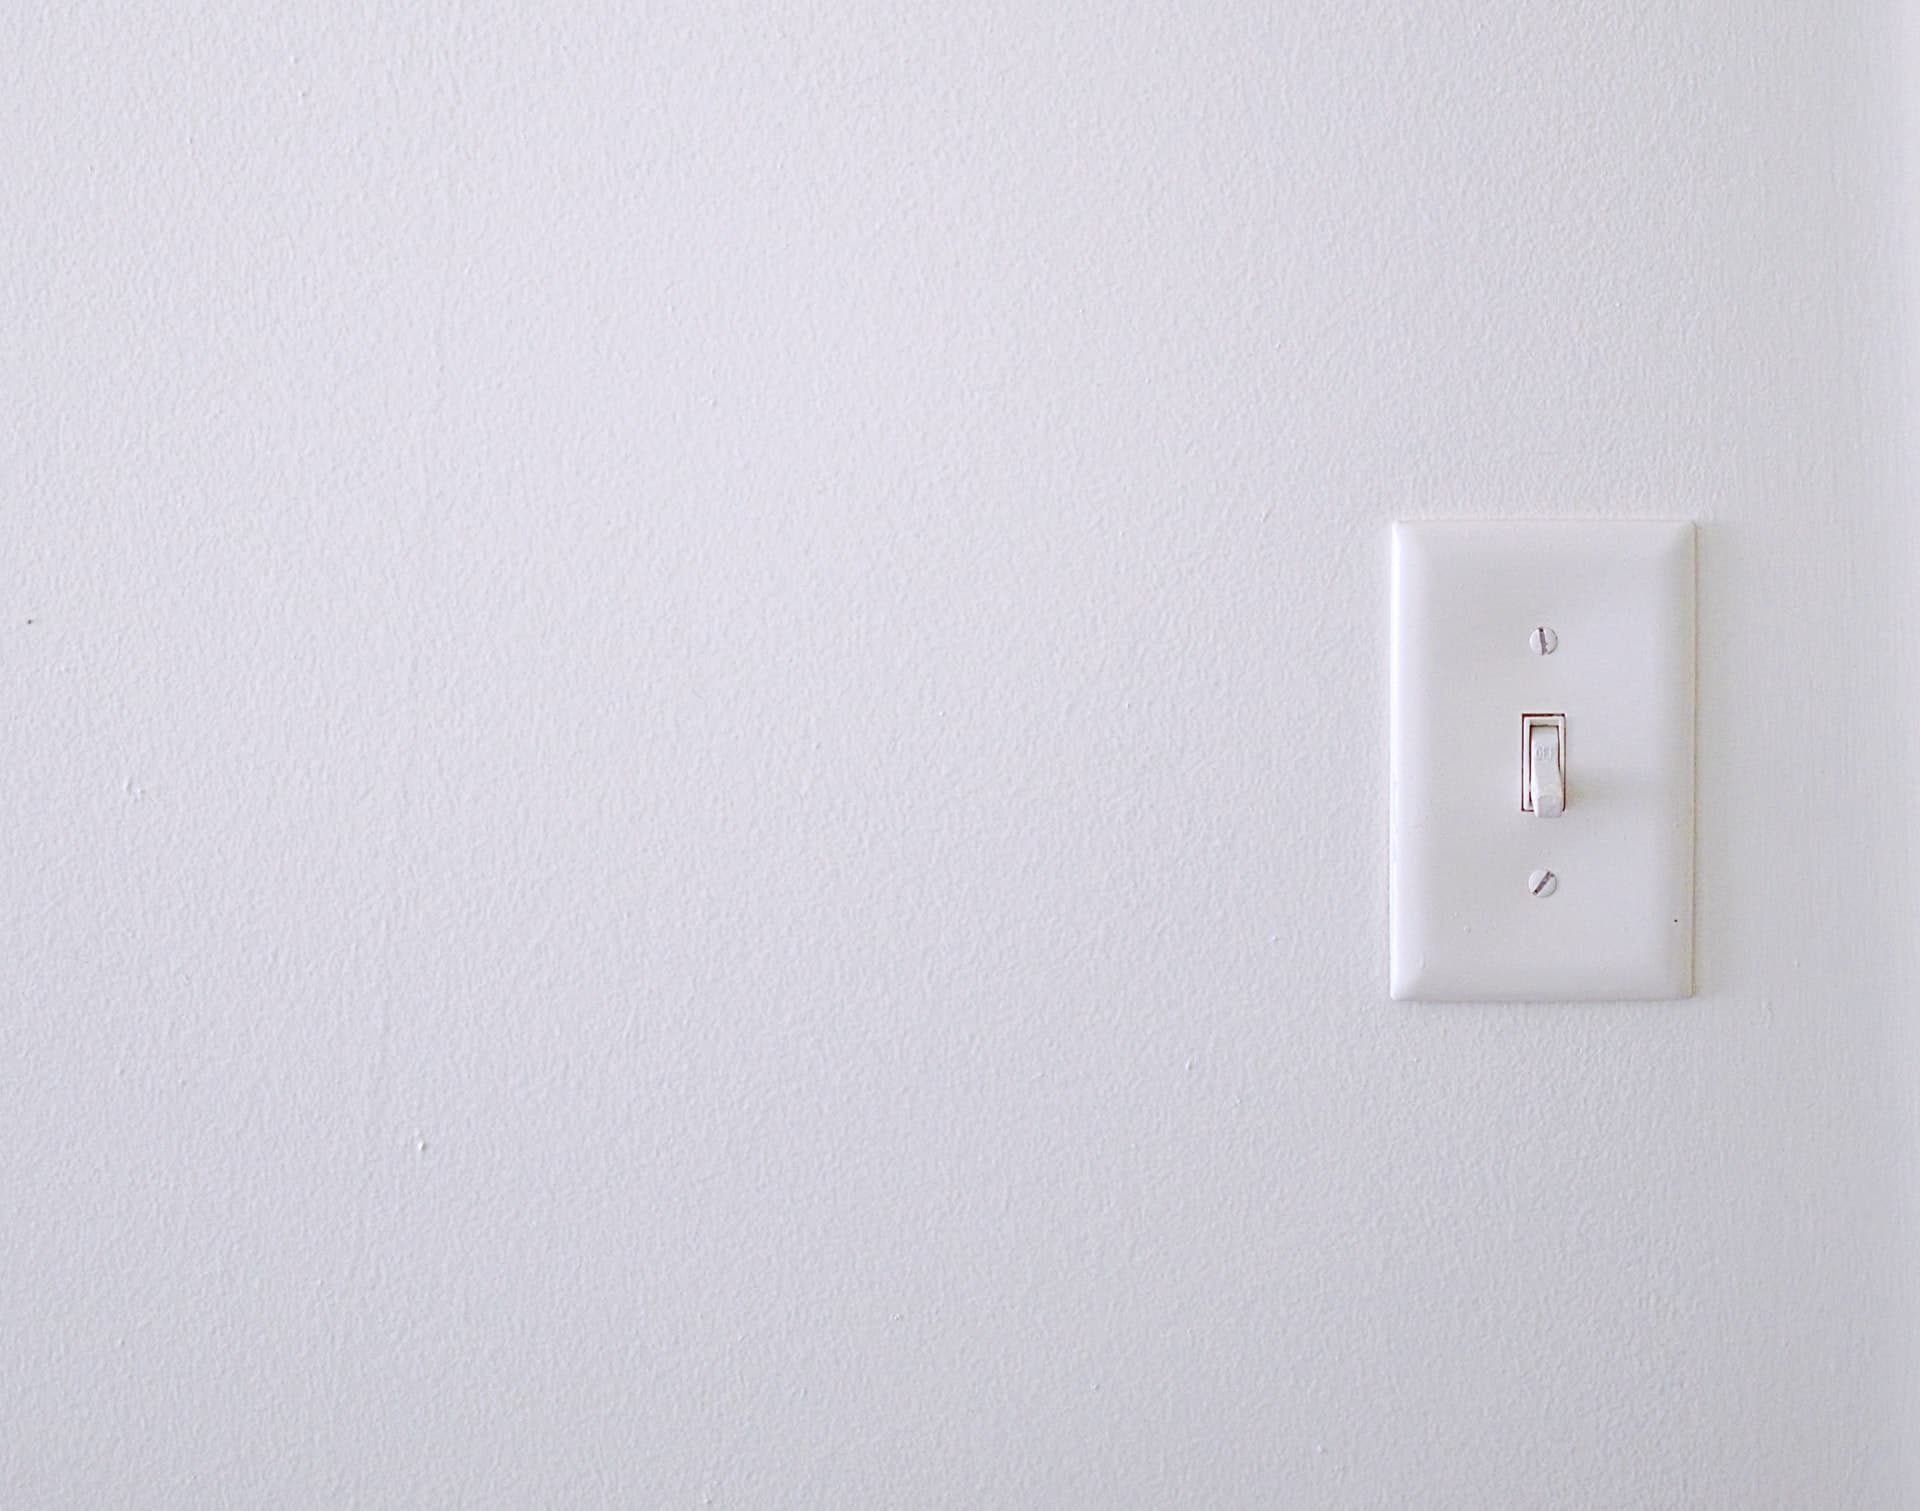 light switch replacement